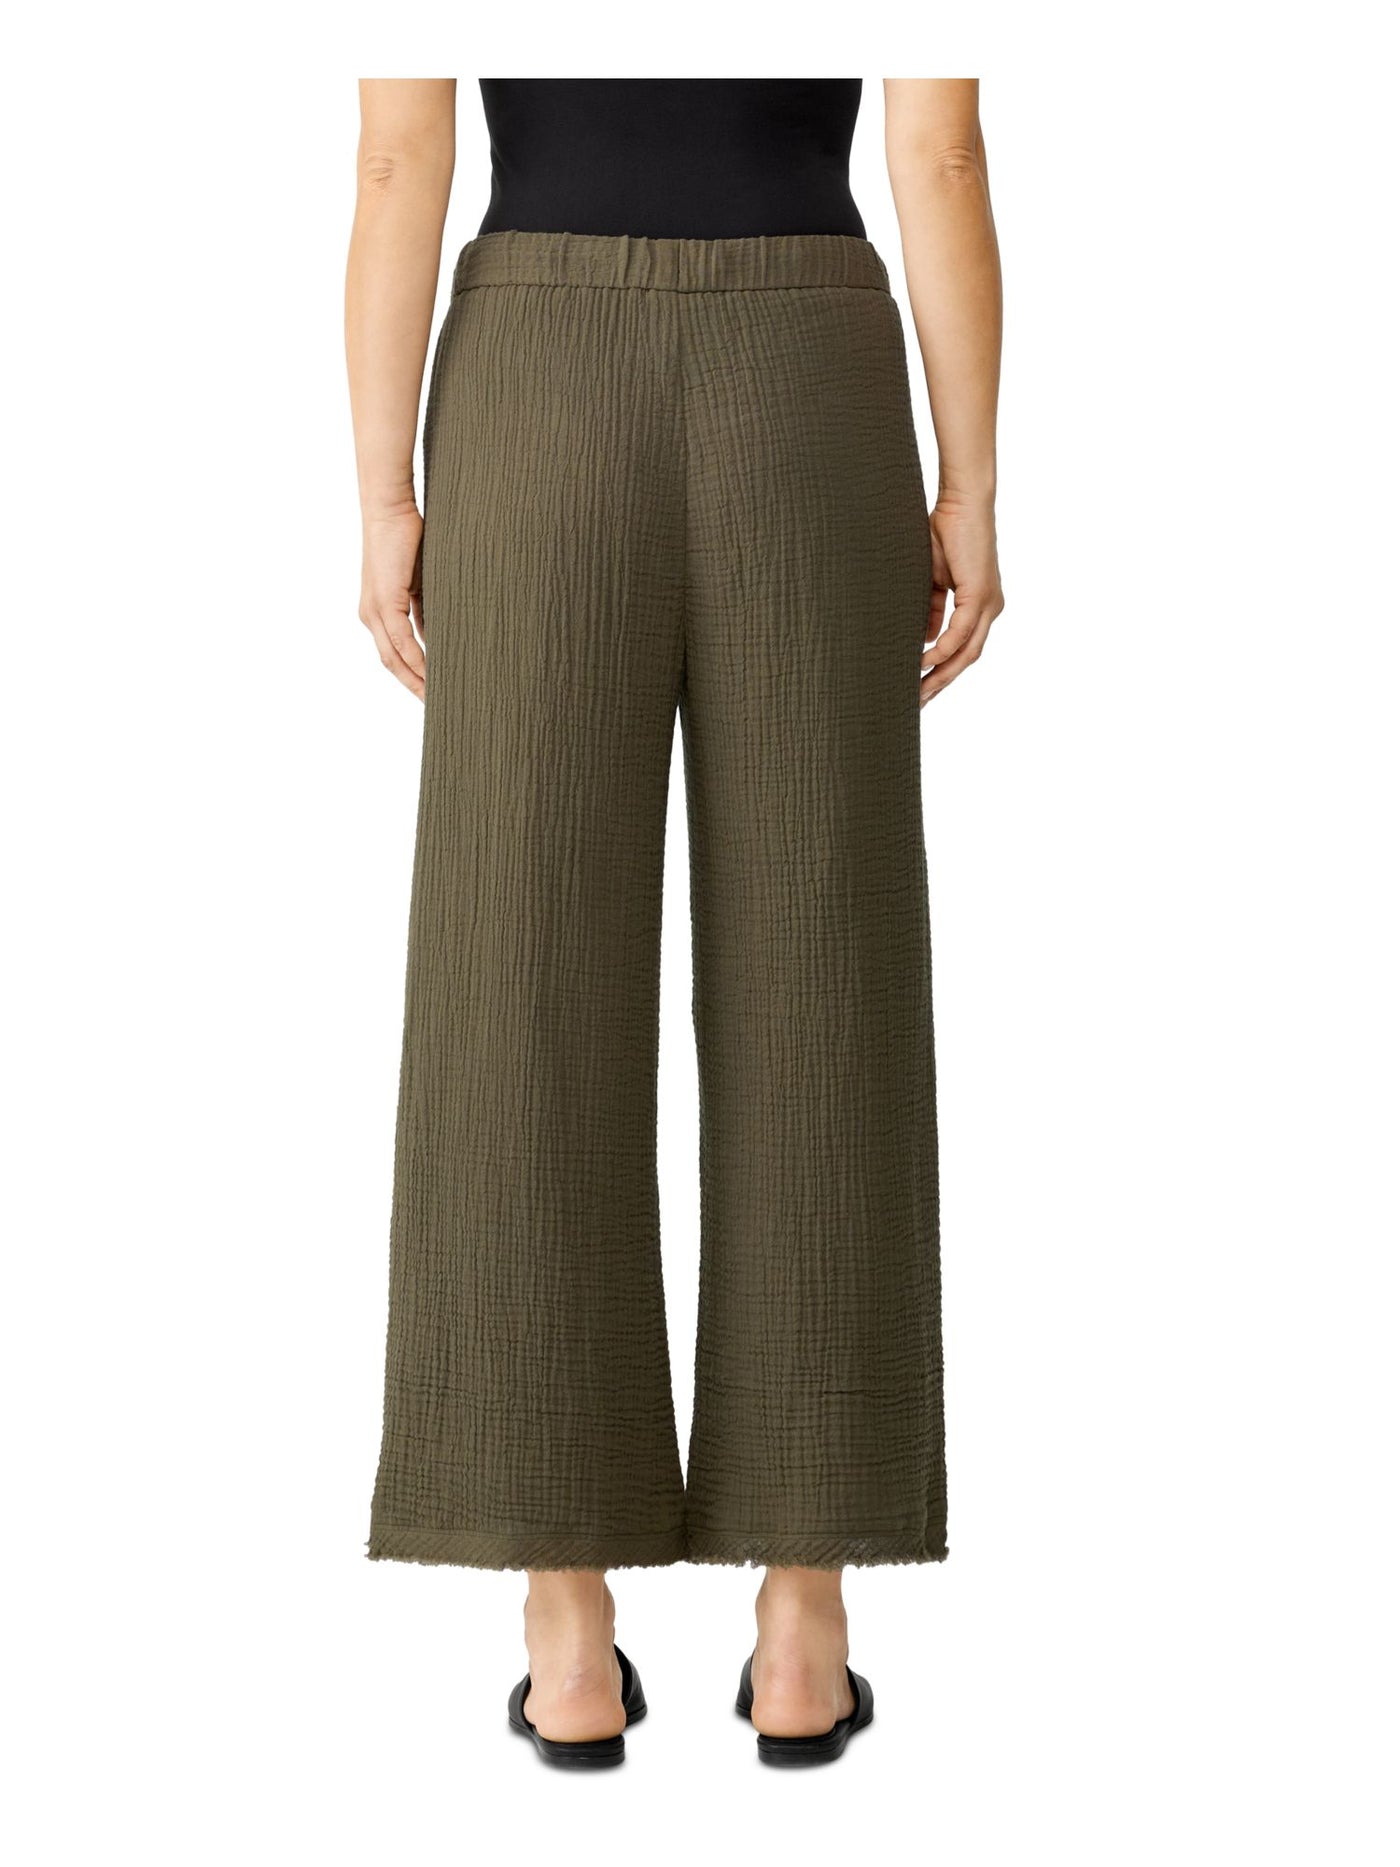 EILEEN FISHER Womens Green Textured Unlined Elastic Waist Drawstring Pull On Wide Leg Pants Petites PP